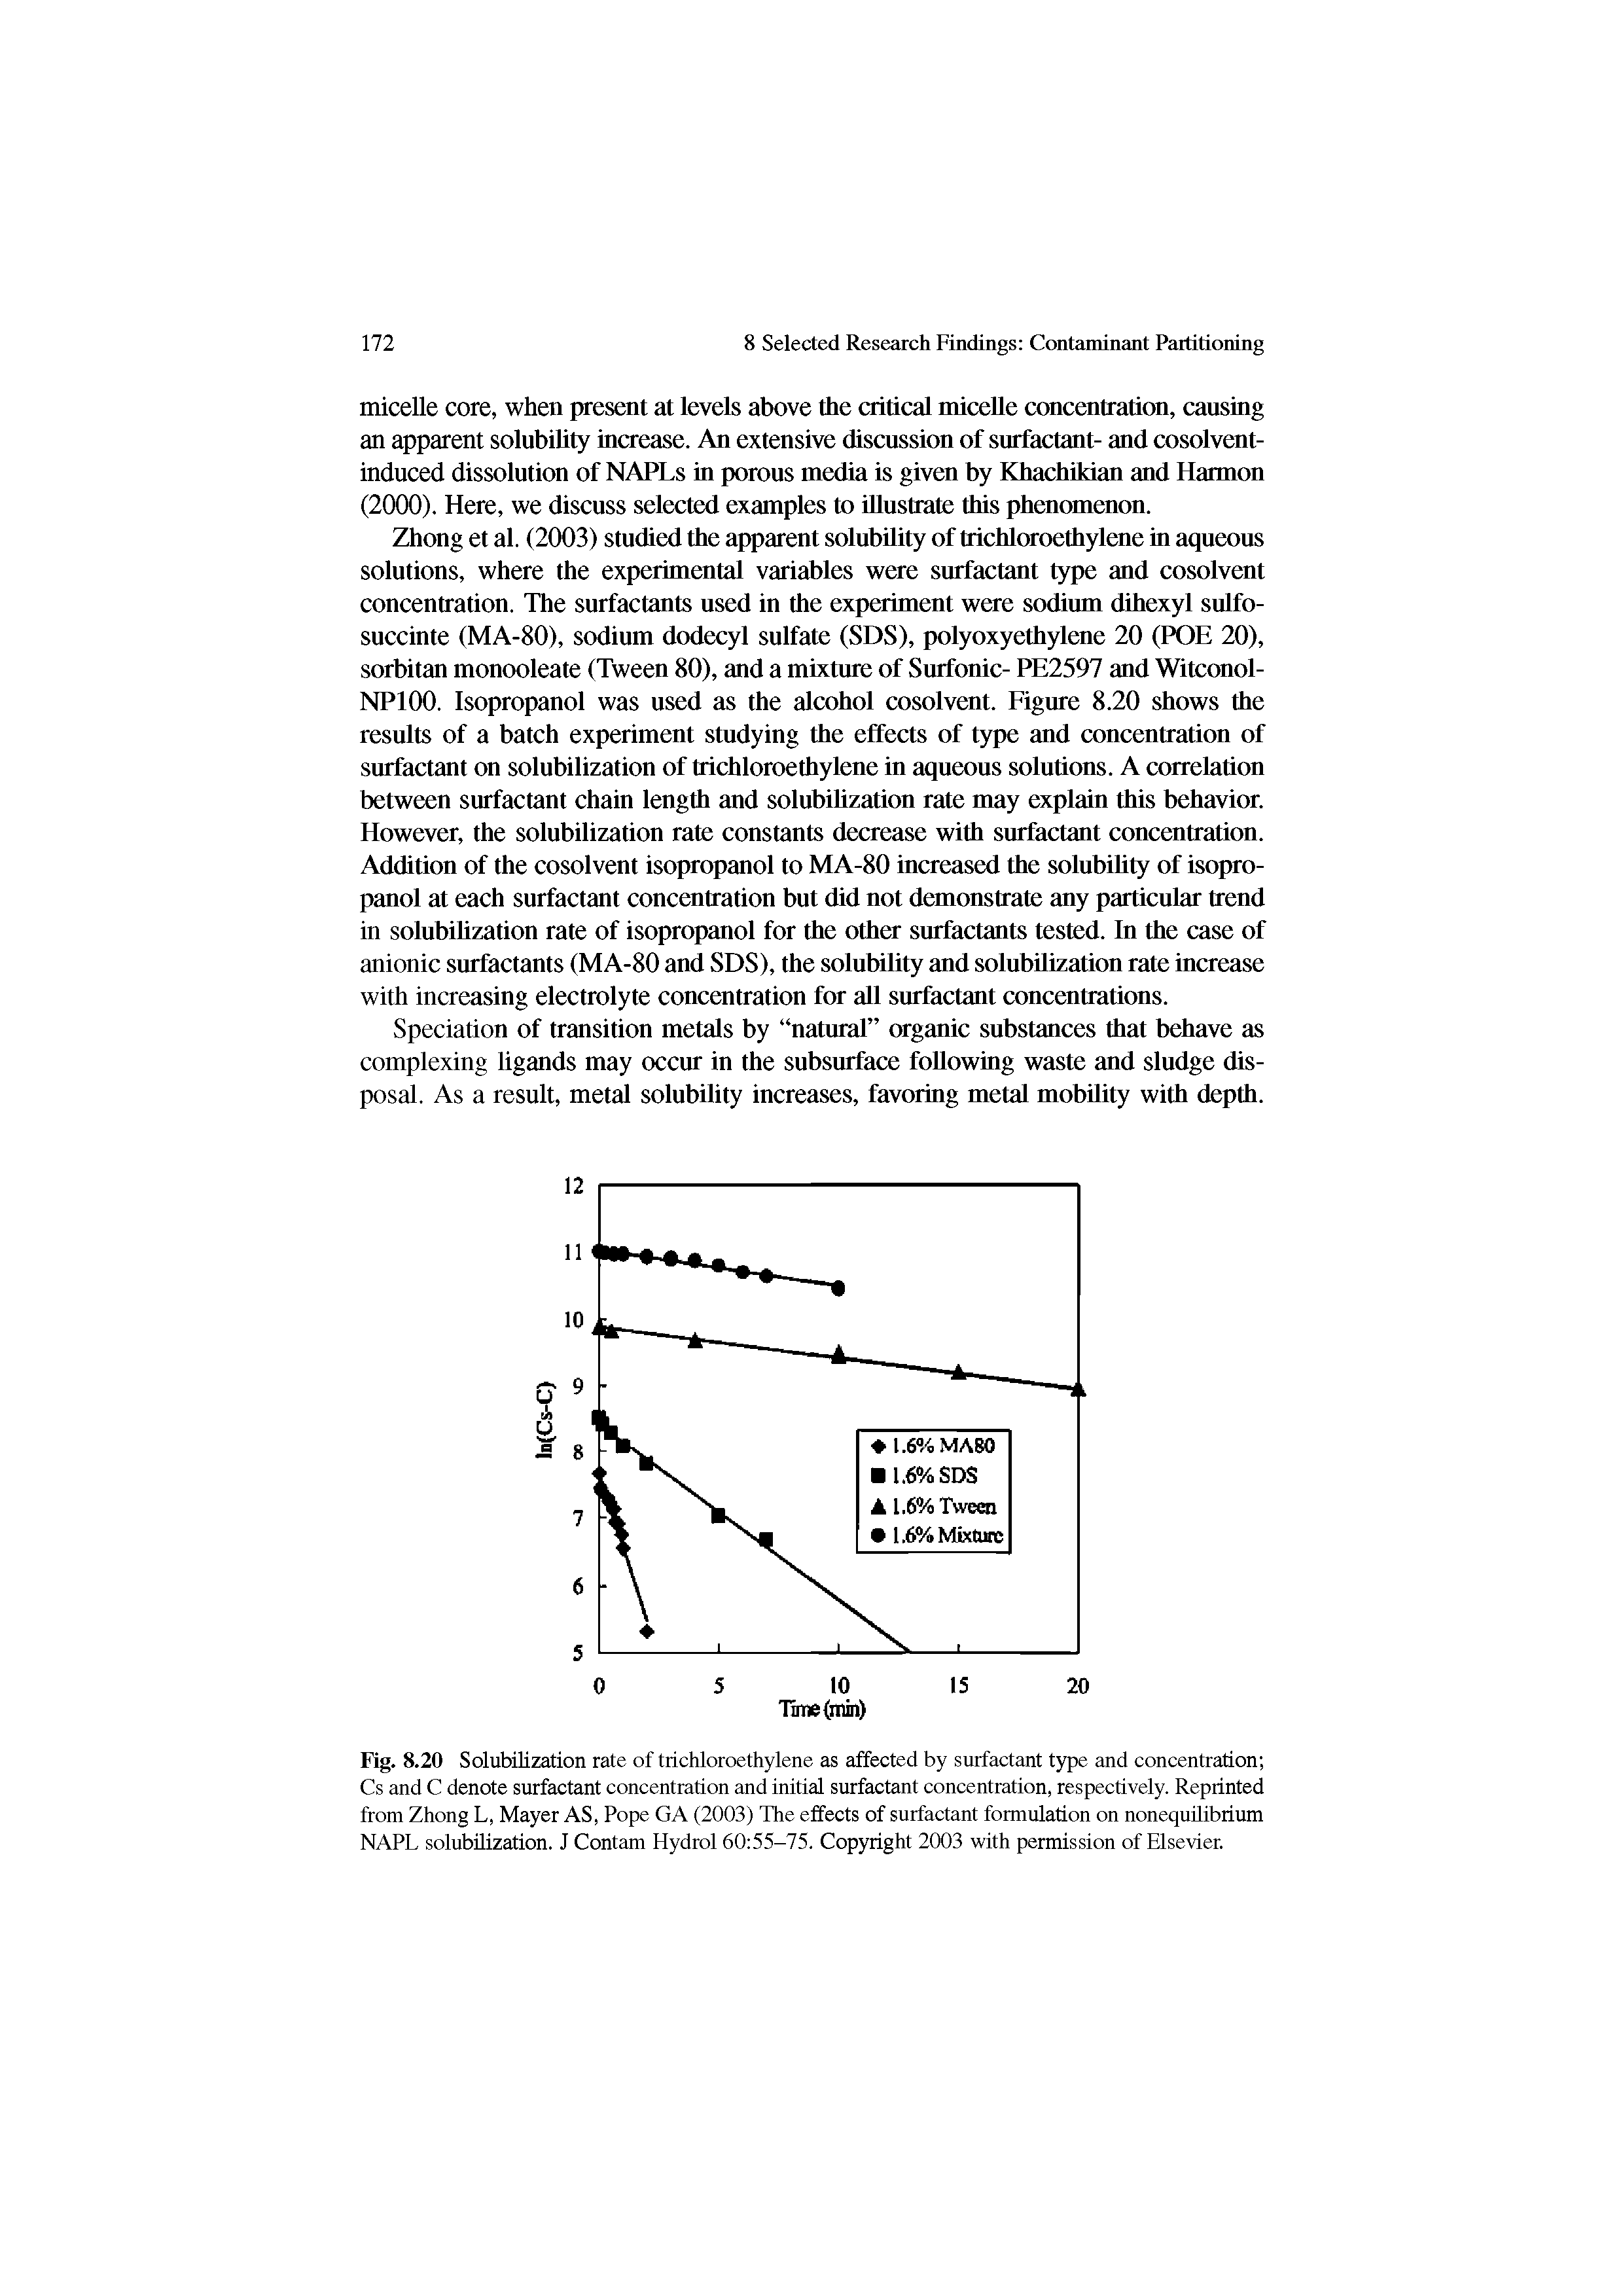 Fig. 8.20 Solubilization rate of trichloroethylene as affected by surfactant type and concentration Cs and C denote surfactant concentration and initial surfactant concentration, respectively. Reprinted from Zhong L, Mayer AS, Pope GA (2003) The effects of surfactant formulation on nonequUibrium NAPL solubilization. J Contam Hydrol 60 55-75. Copyright 2003 with permission of Elsevier.